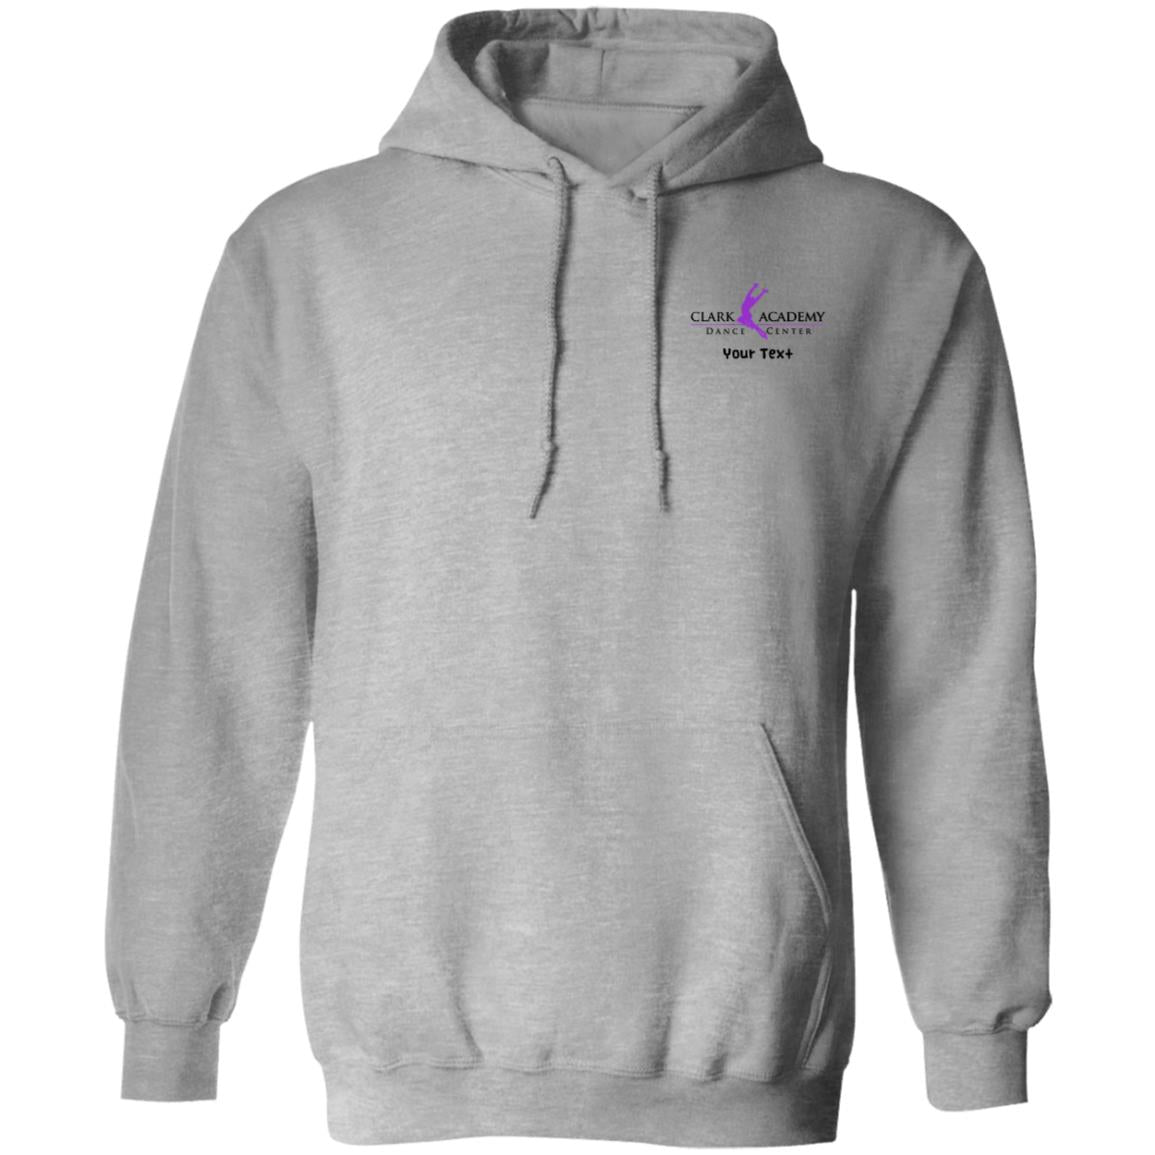 CADC Pullover Hoodie - With FREE Personalization